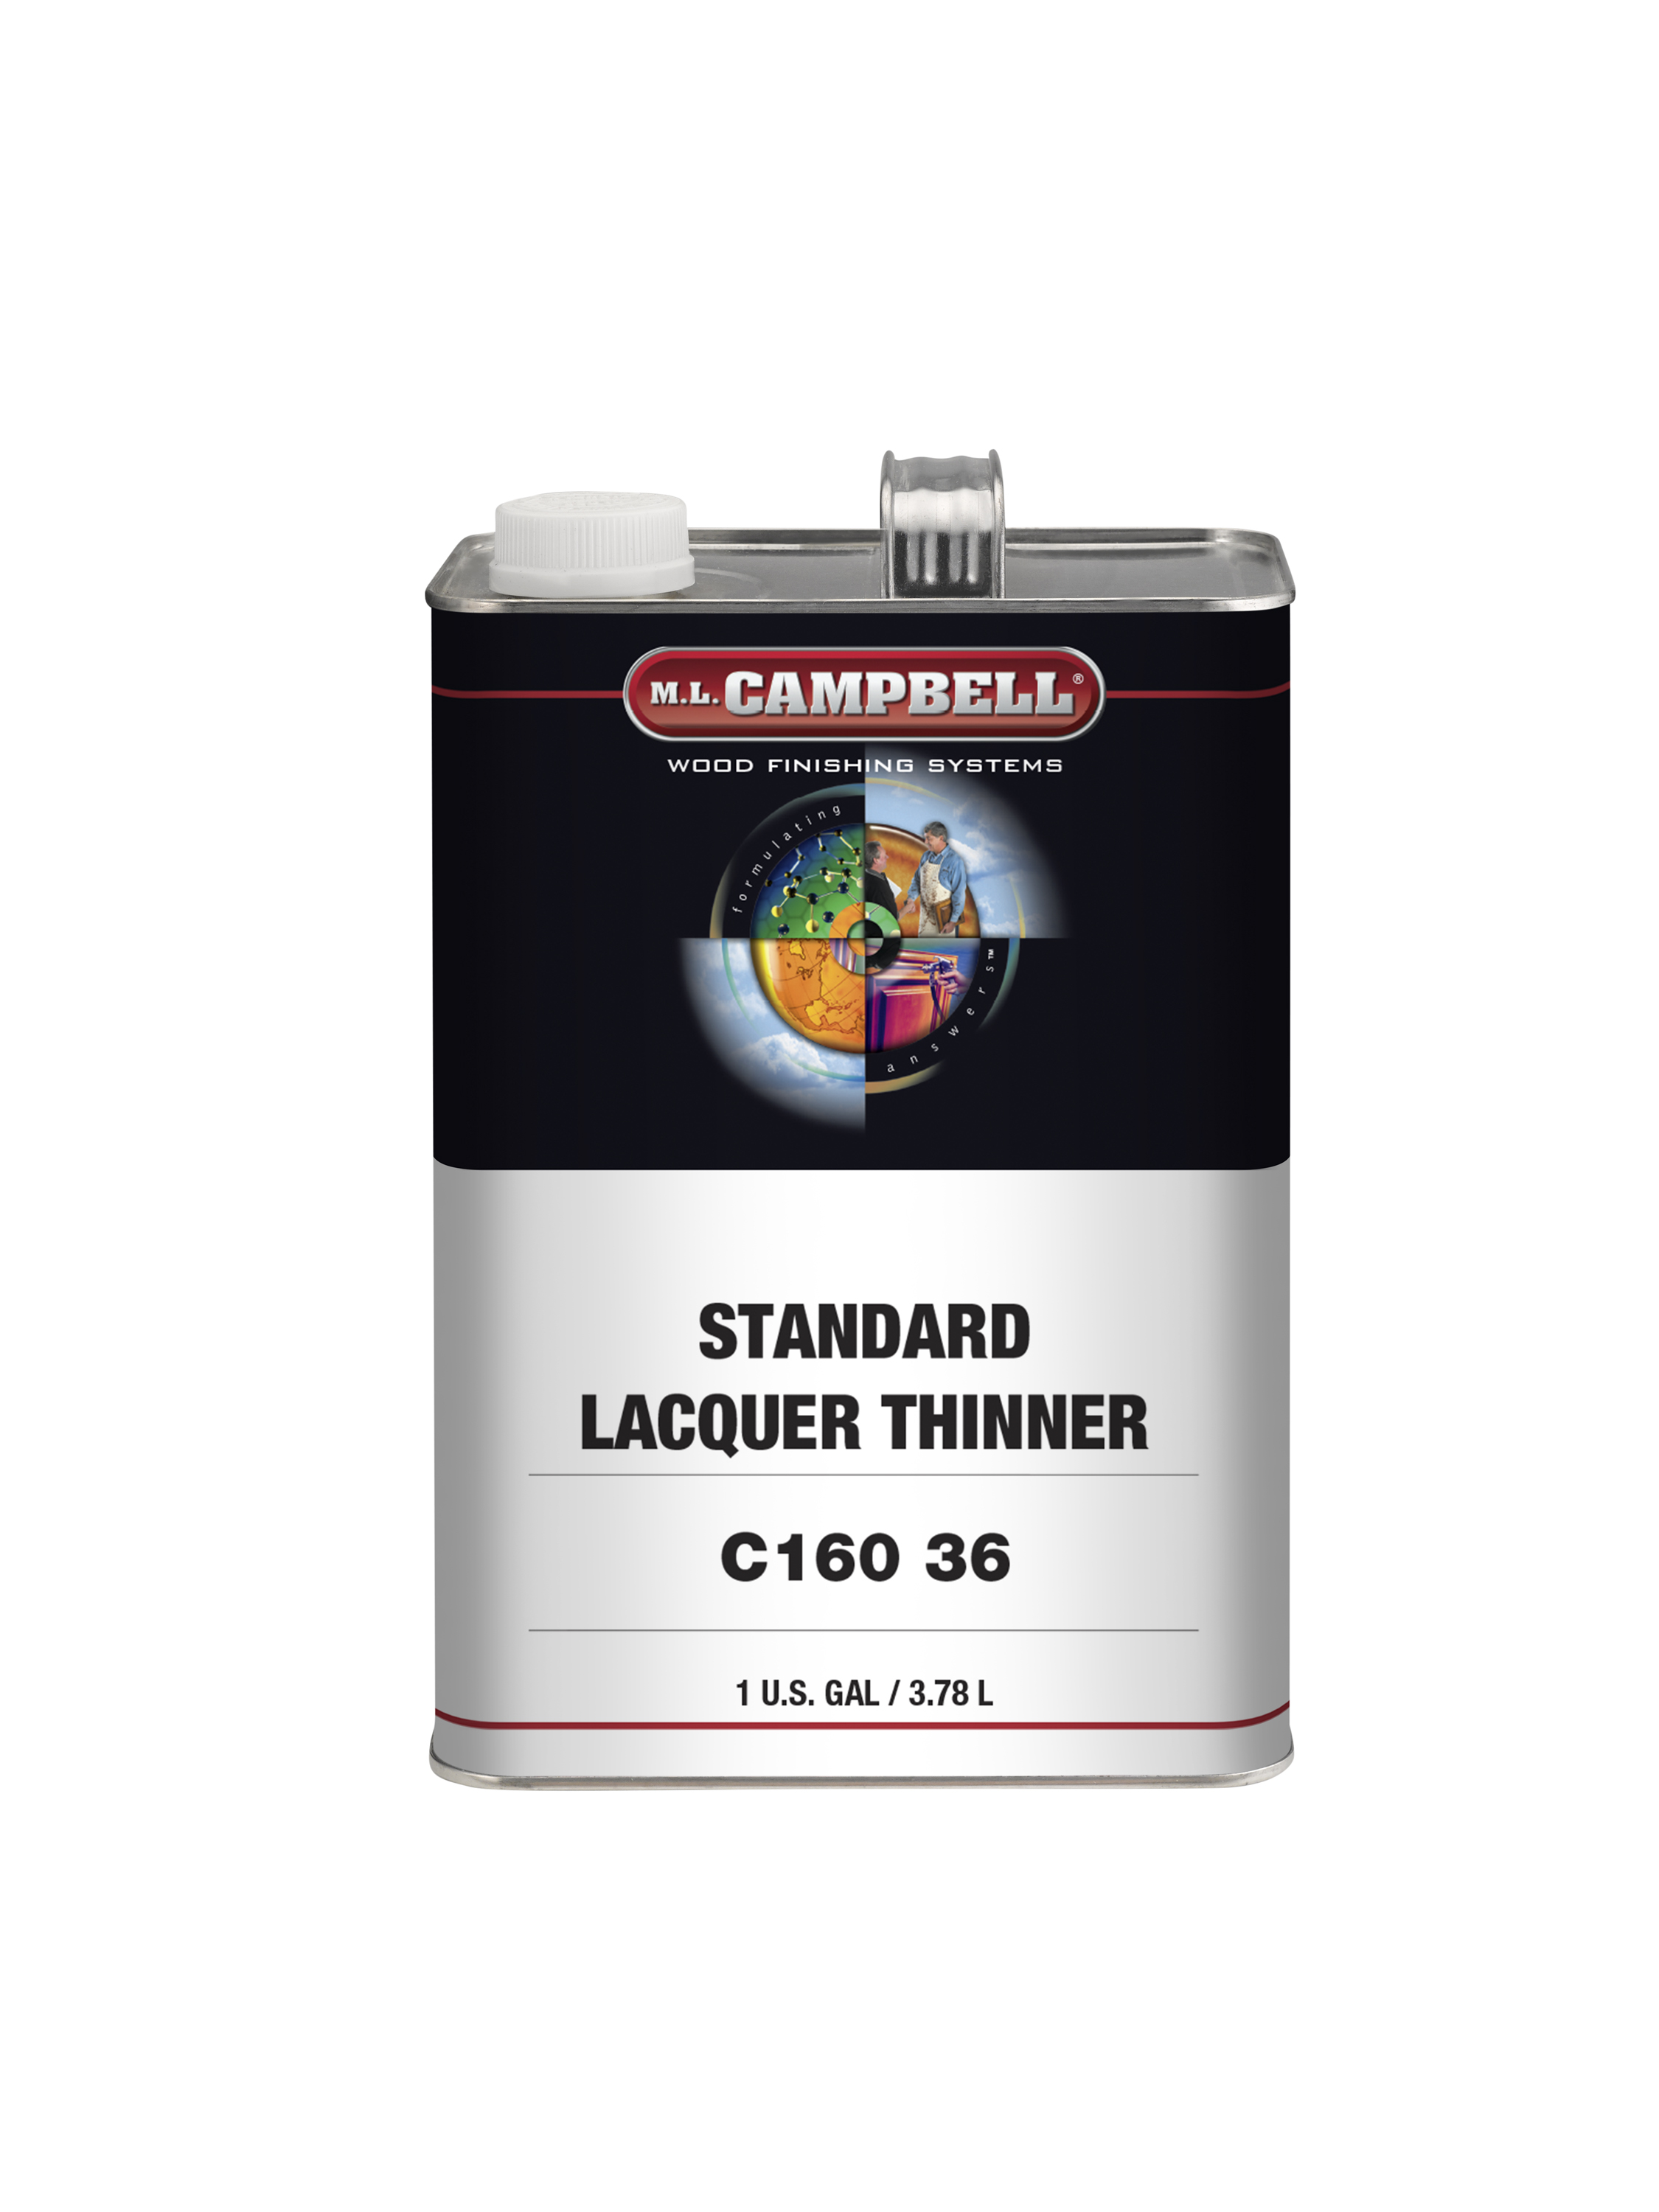 Lacquer Thinner Solvent - 1 GALLON